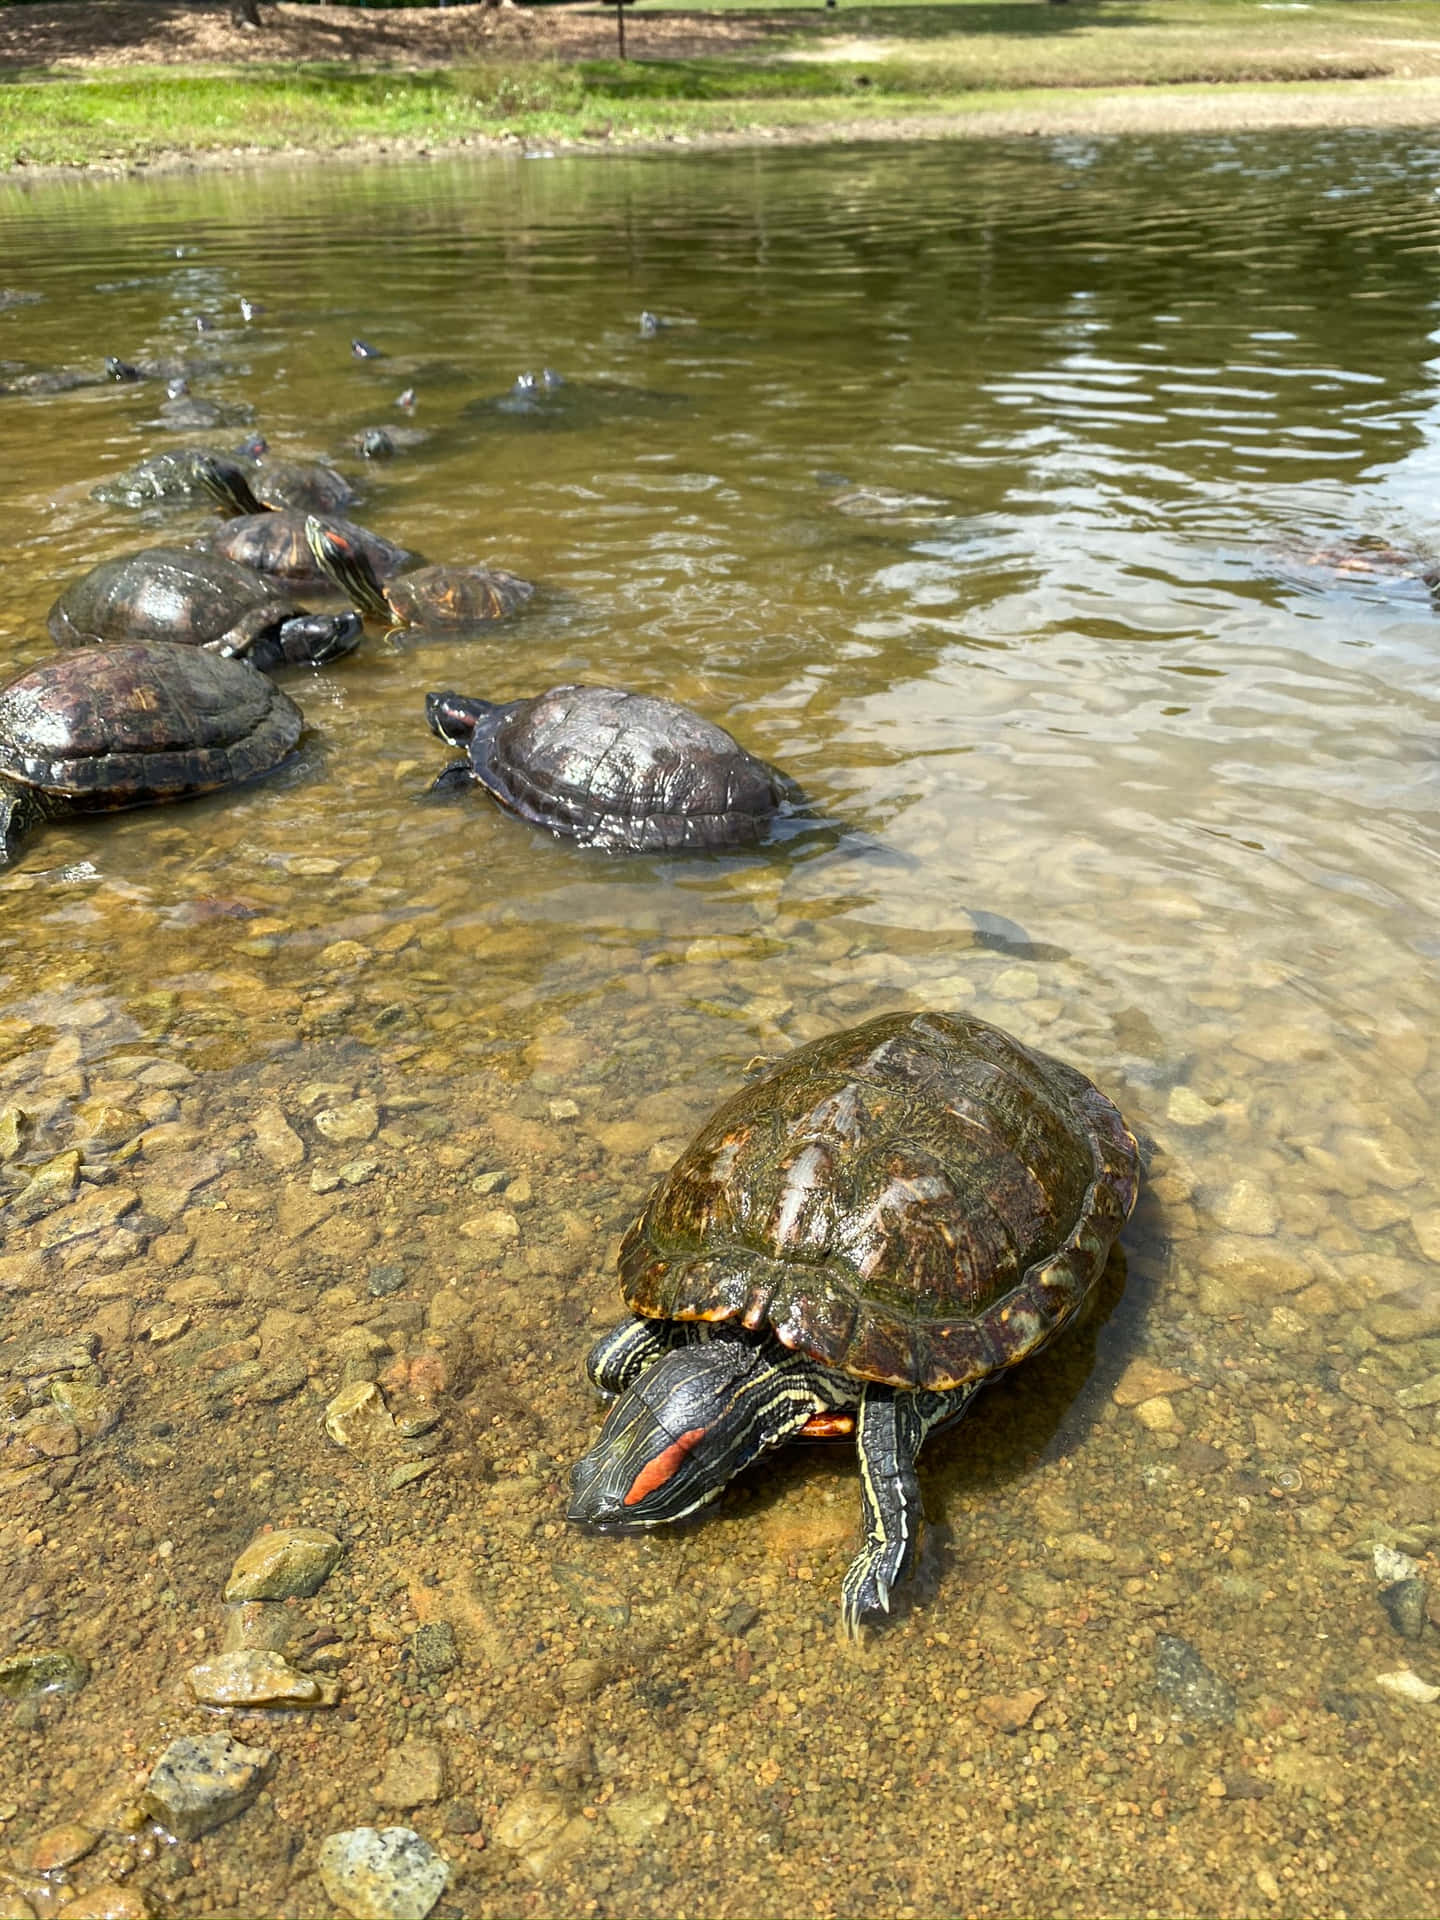 Snapping Turtles Gatheringby Water Wallpaper